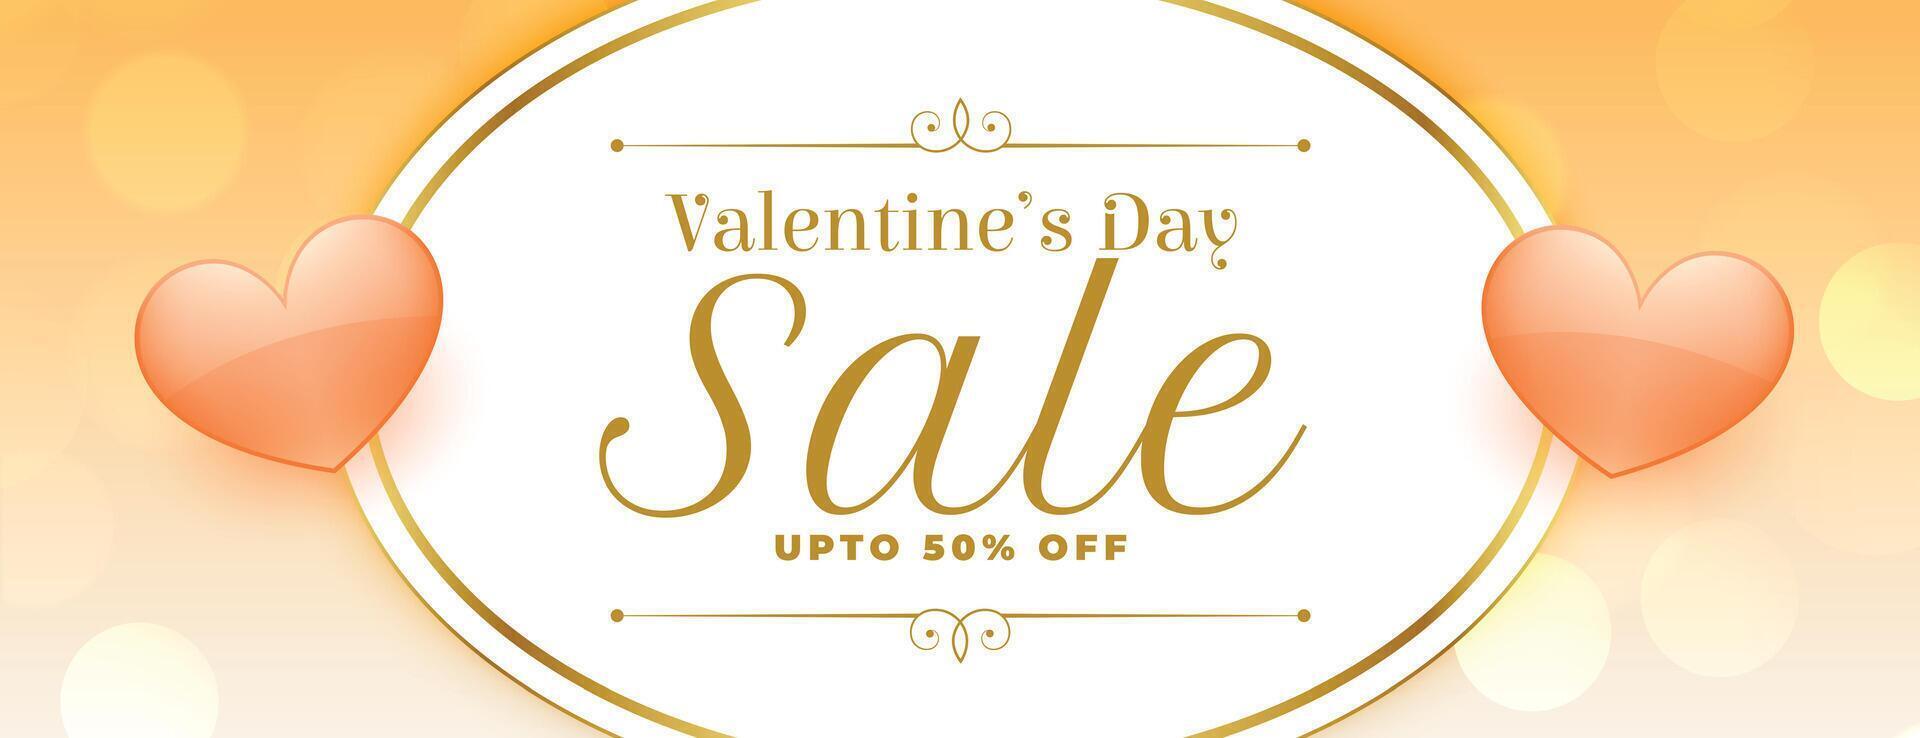 valentines day sale banner with two hearts vector